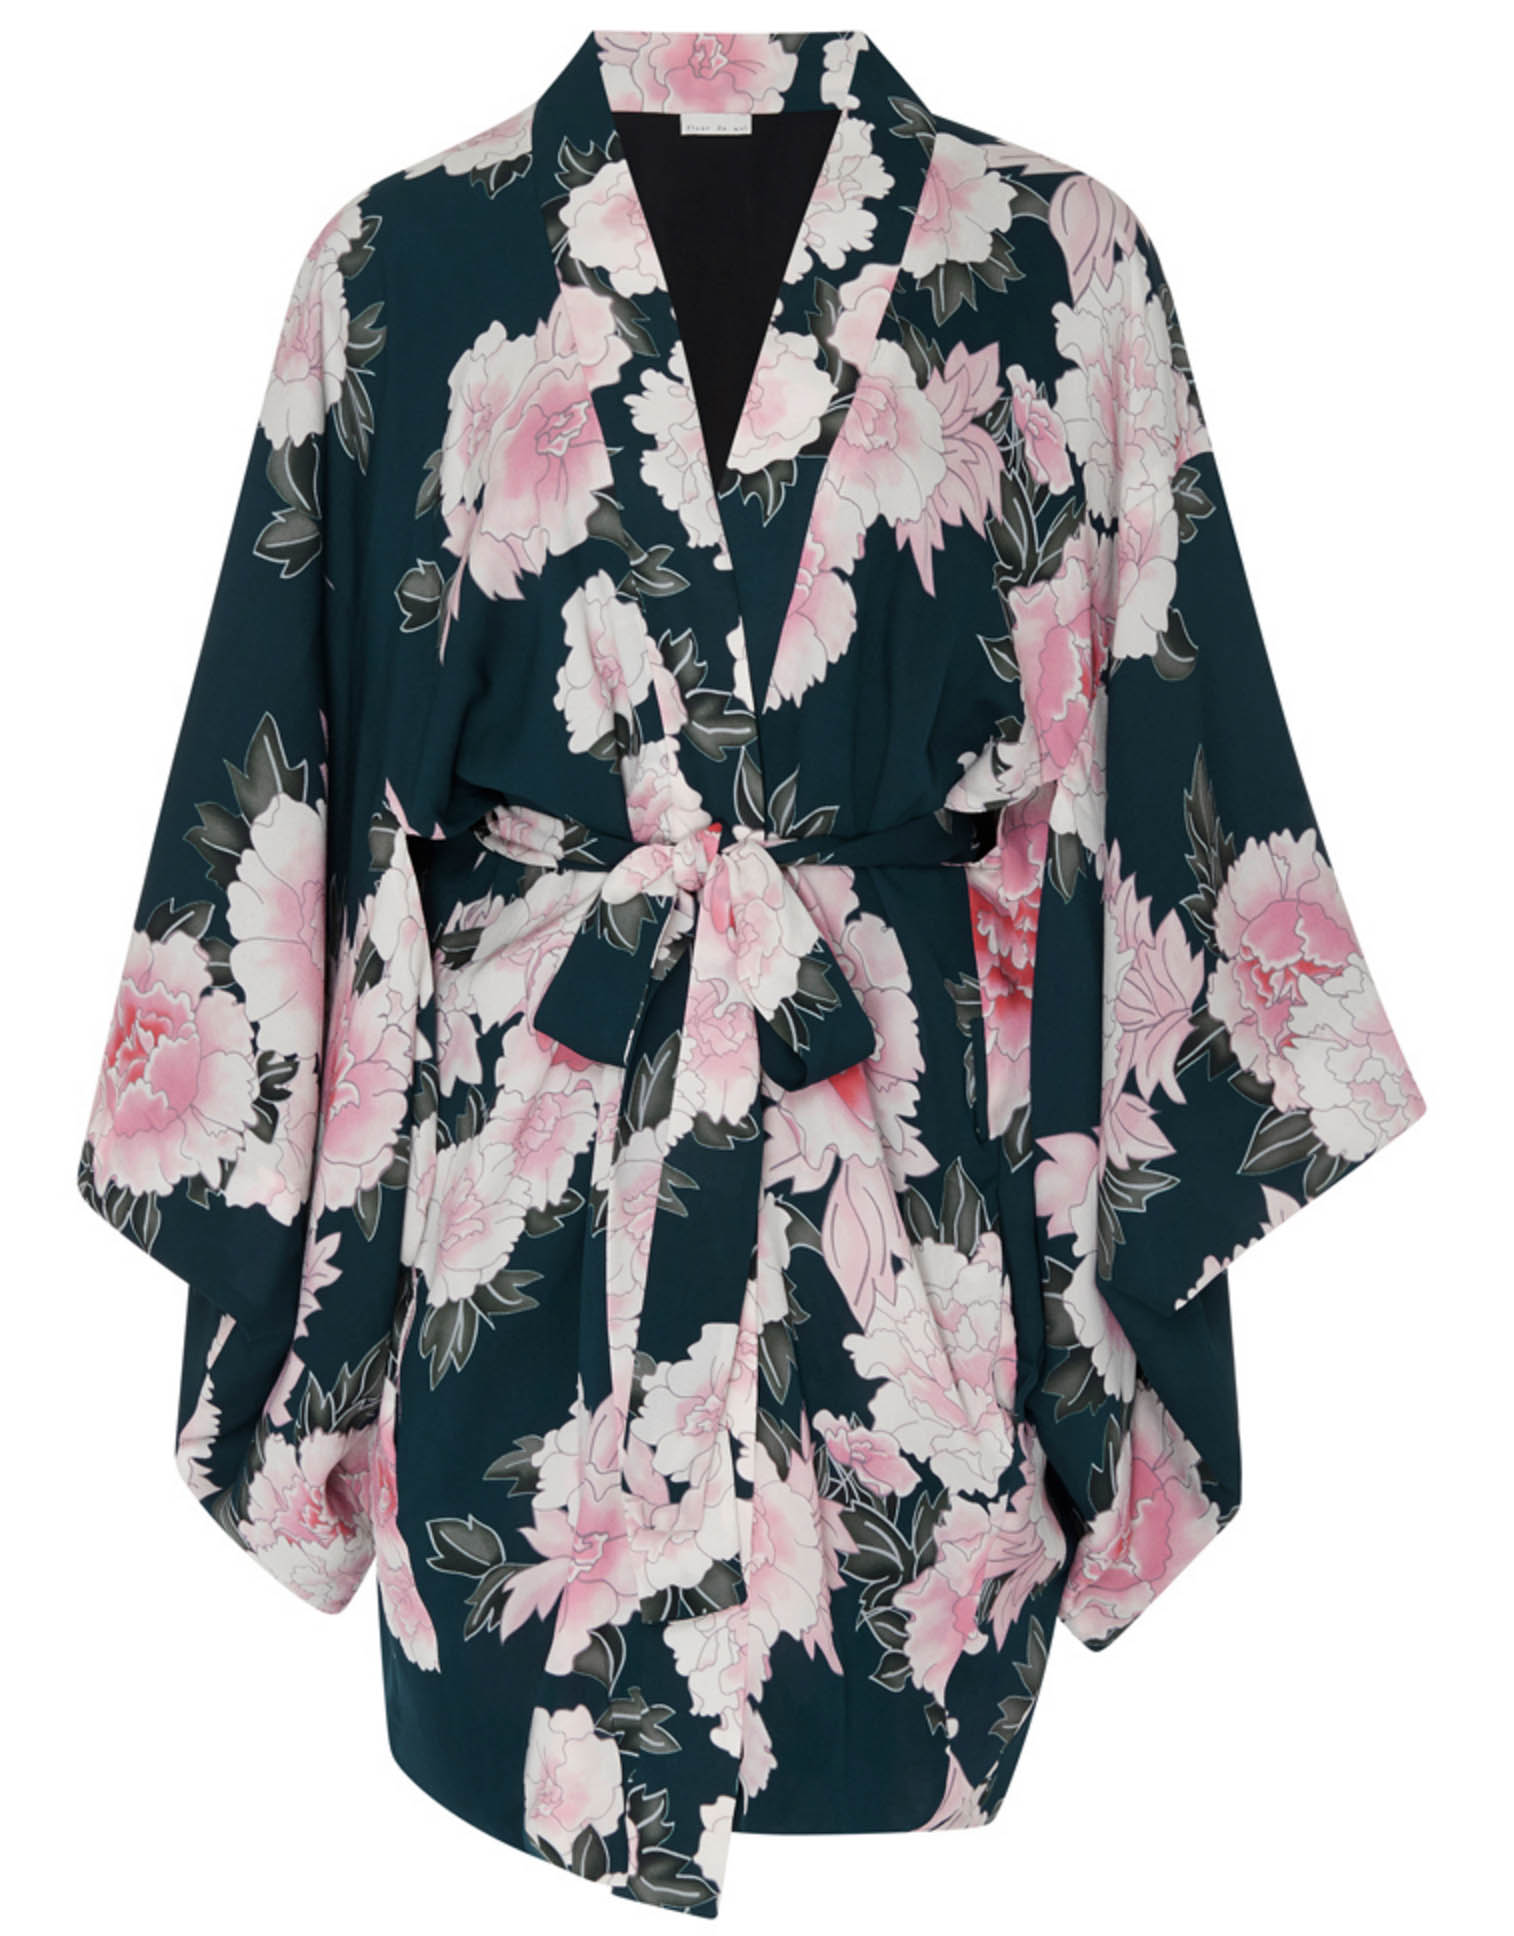 10 of the best on-trend kimono tops for every budget - Grazia